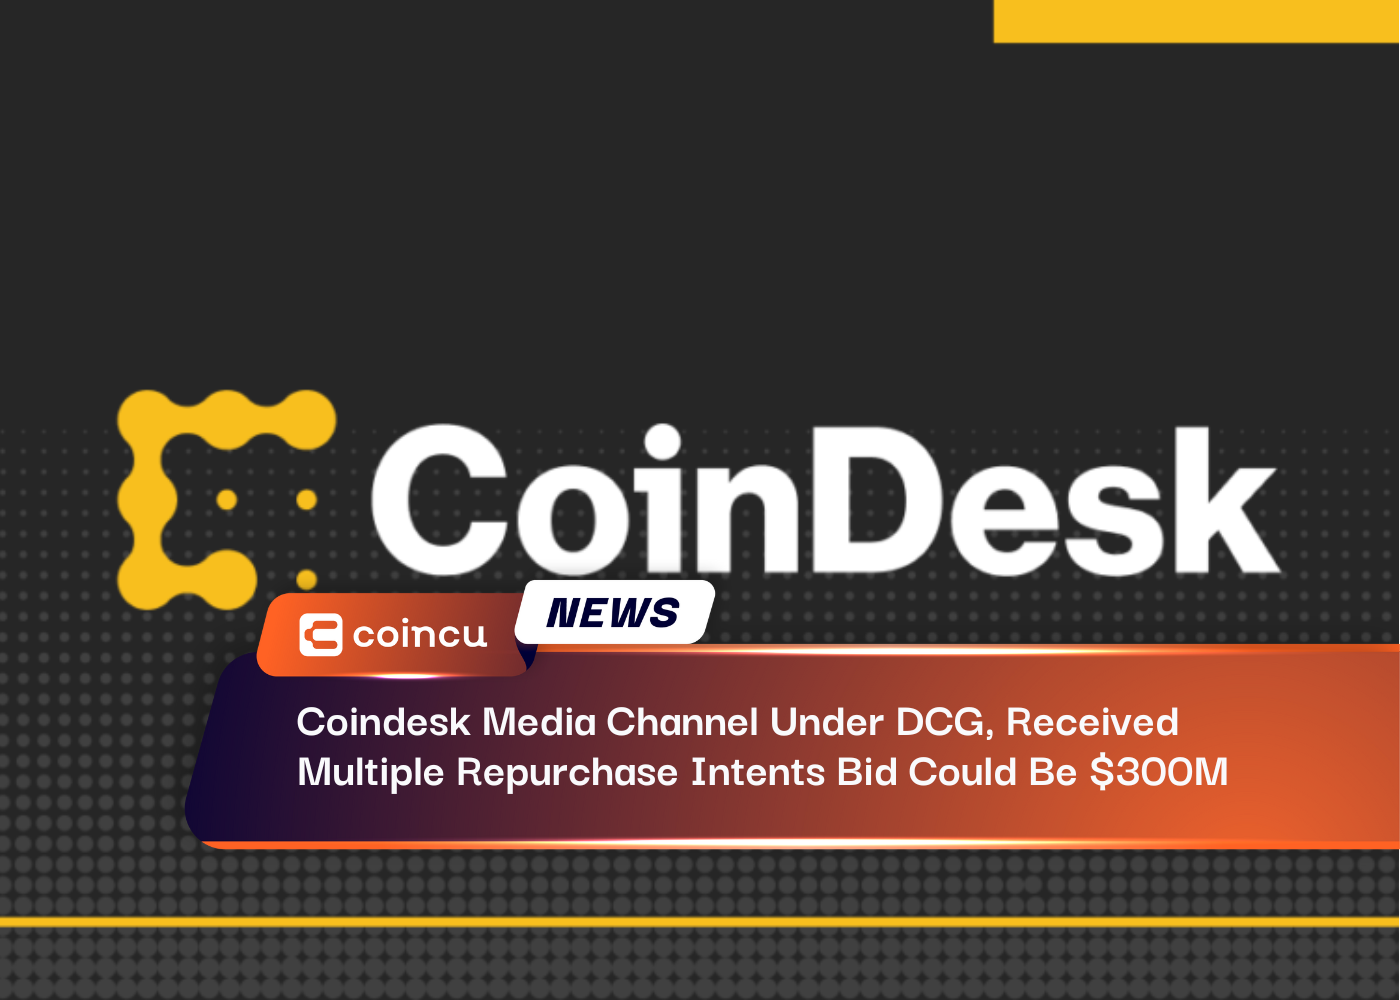 Coindesk Media Channel Under DCG, Received Multiple Repurchase Intents Bid Could Be $300M